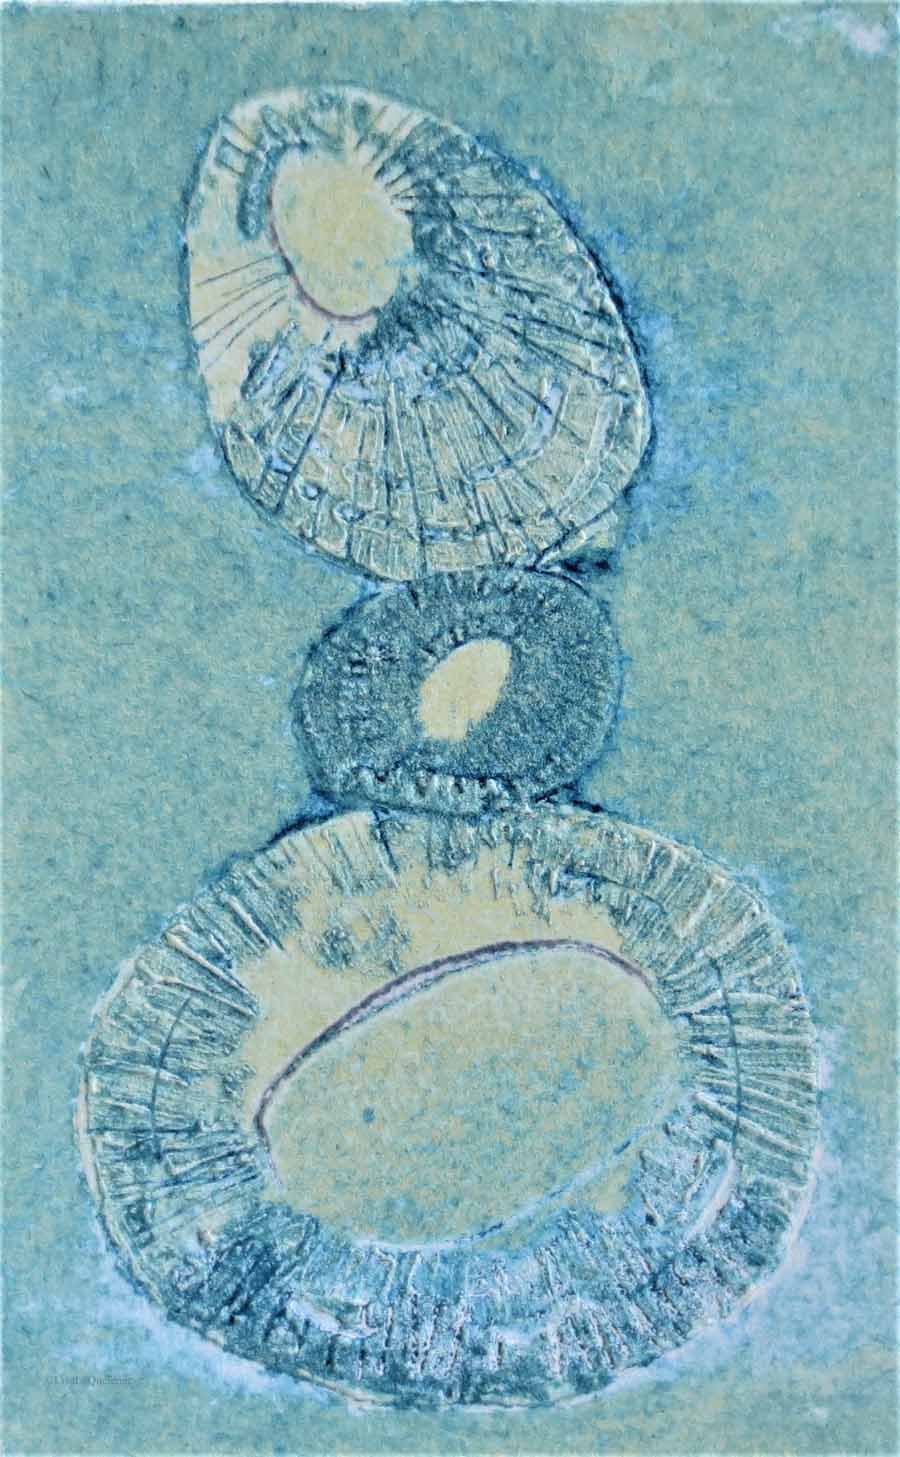 Limpet shells original collagraph print no.4 of a varied edition of 6